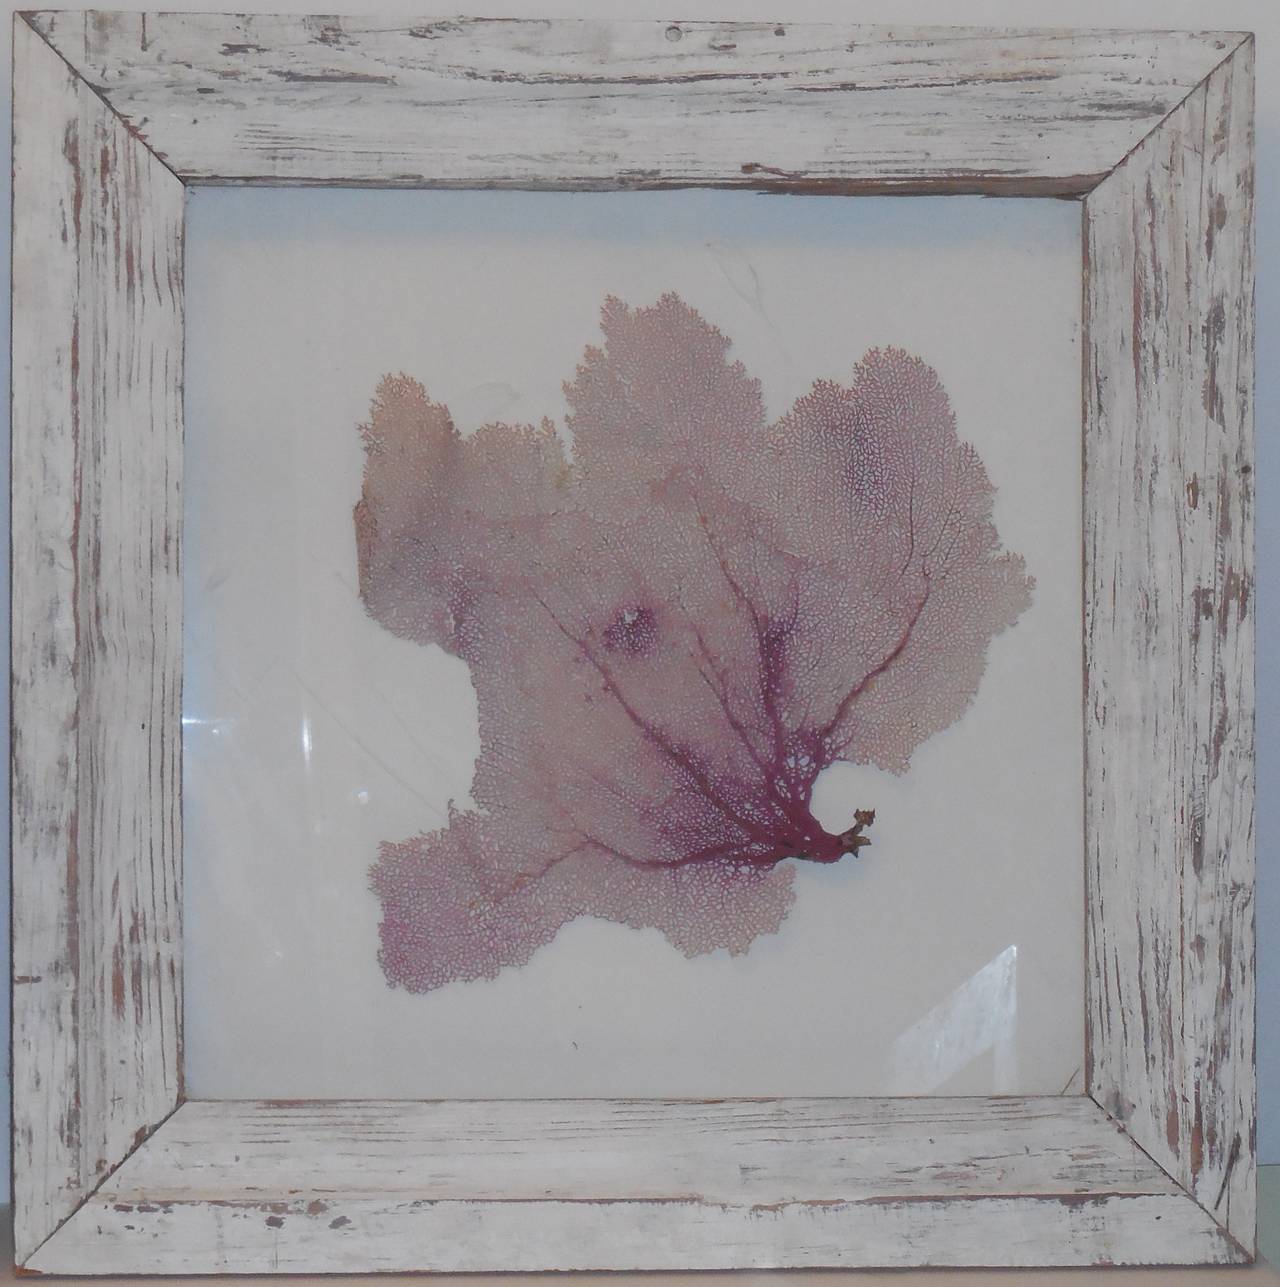 Pair of beautiful coral lay on white texture paint, framed in reclaimed wood.
Shadow box.
Great decorative item that will bring the beach to your house.